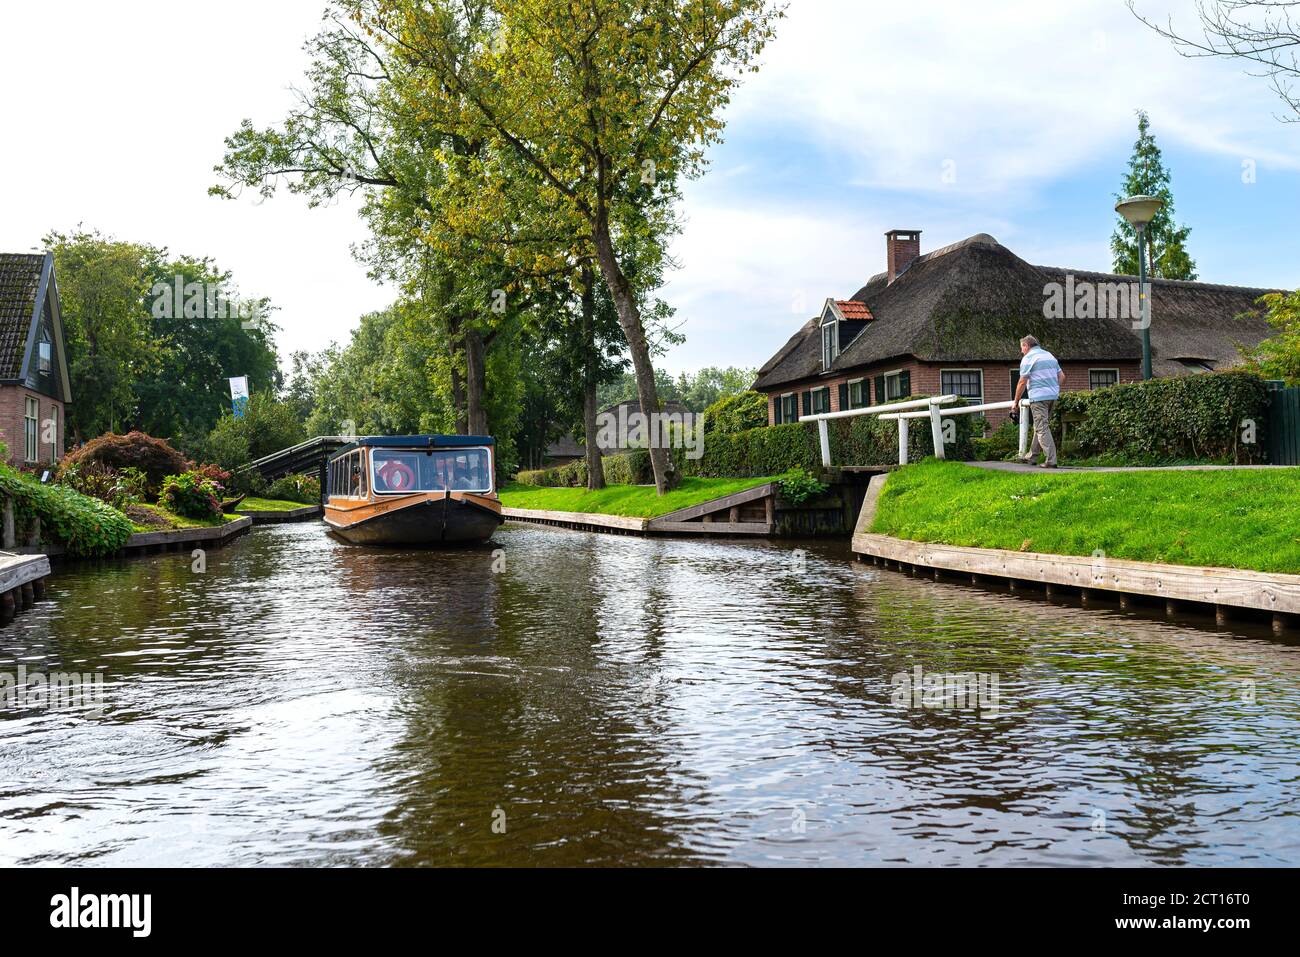 Giethoorn, Netherlands - 13 September 2020. Beautiful thatched buildings in the famous village of Giethoorn in the Netherlands with water canals. The Stock Photo